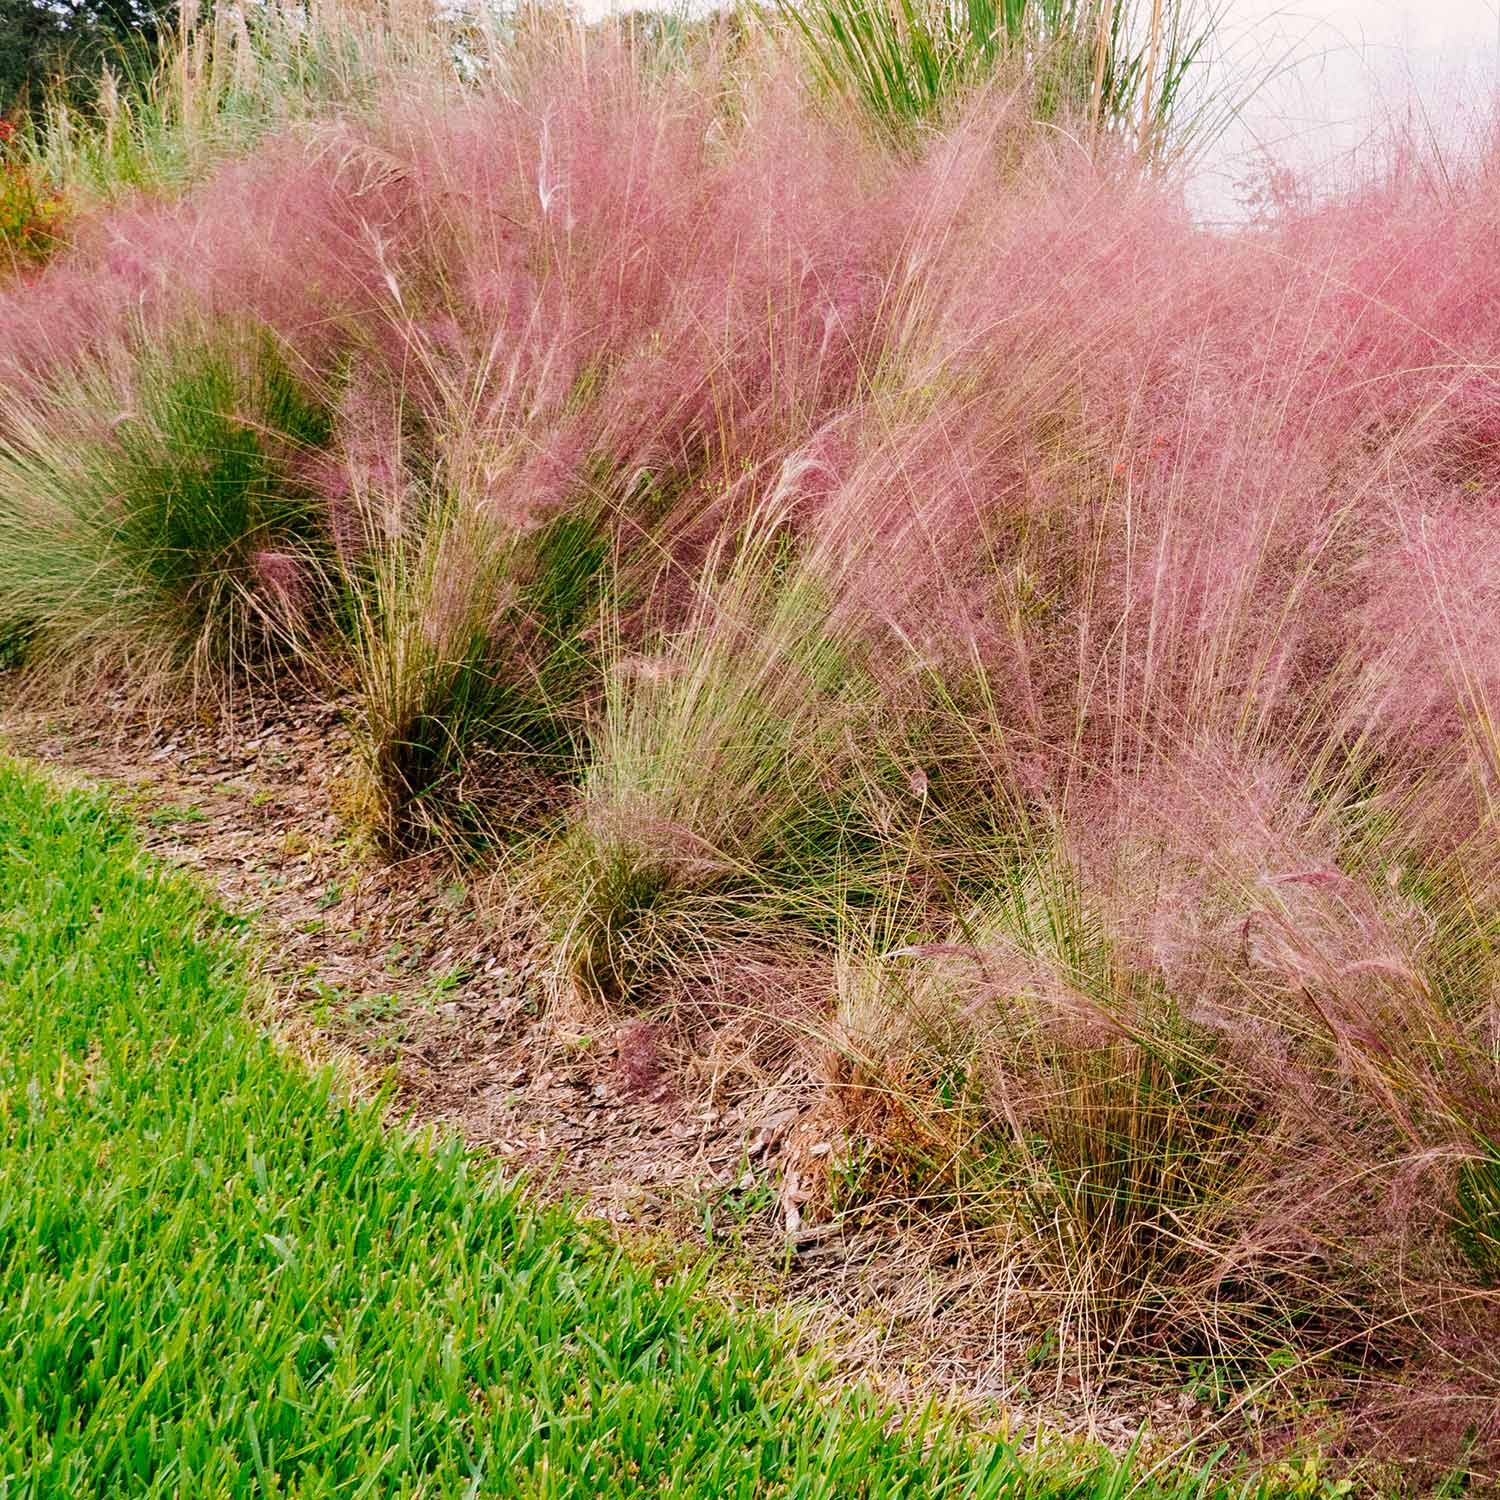 Multiple pink plumes of a Muhlenbergia Capillaris planted near green grass